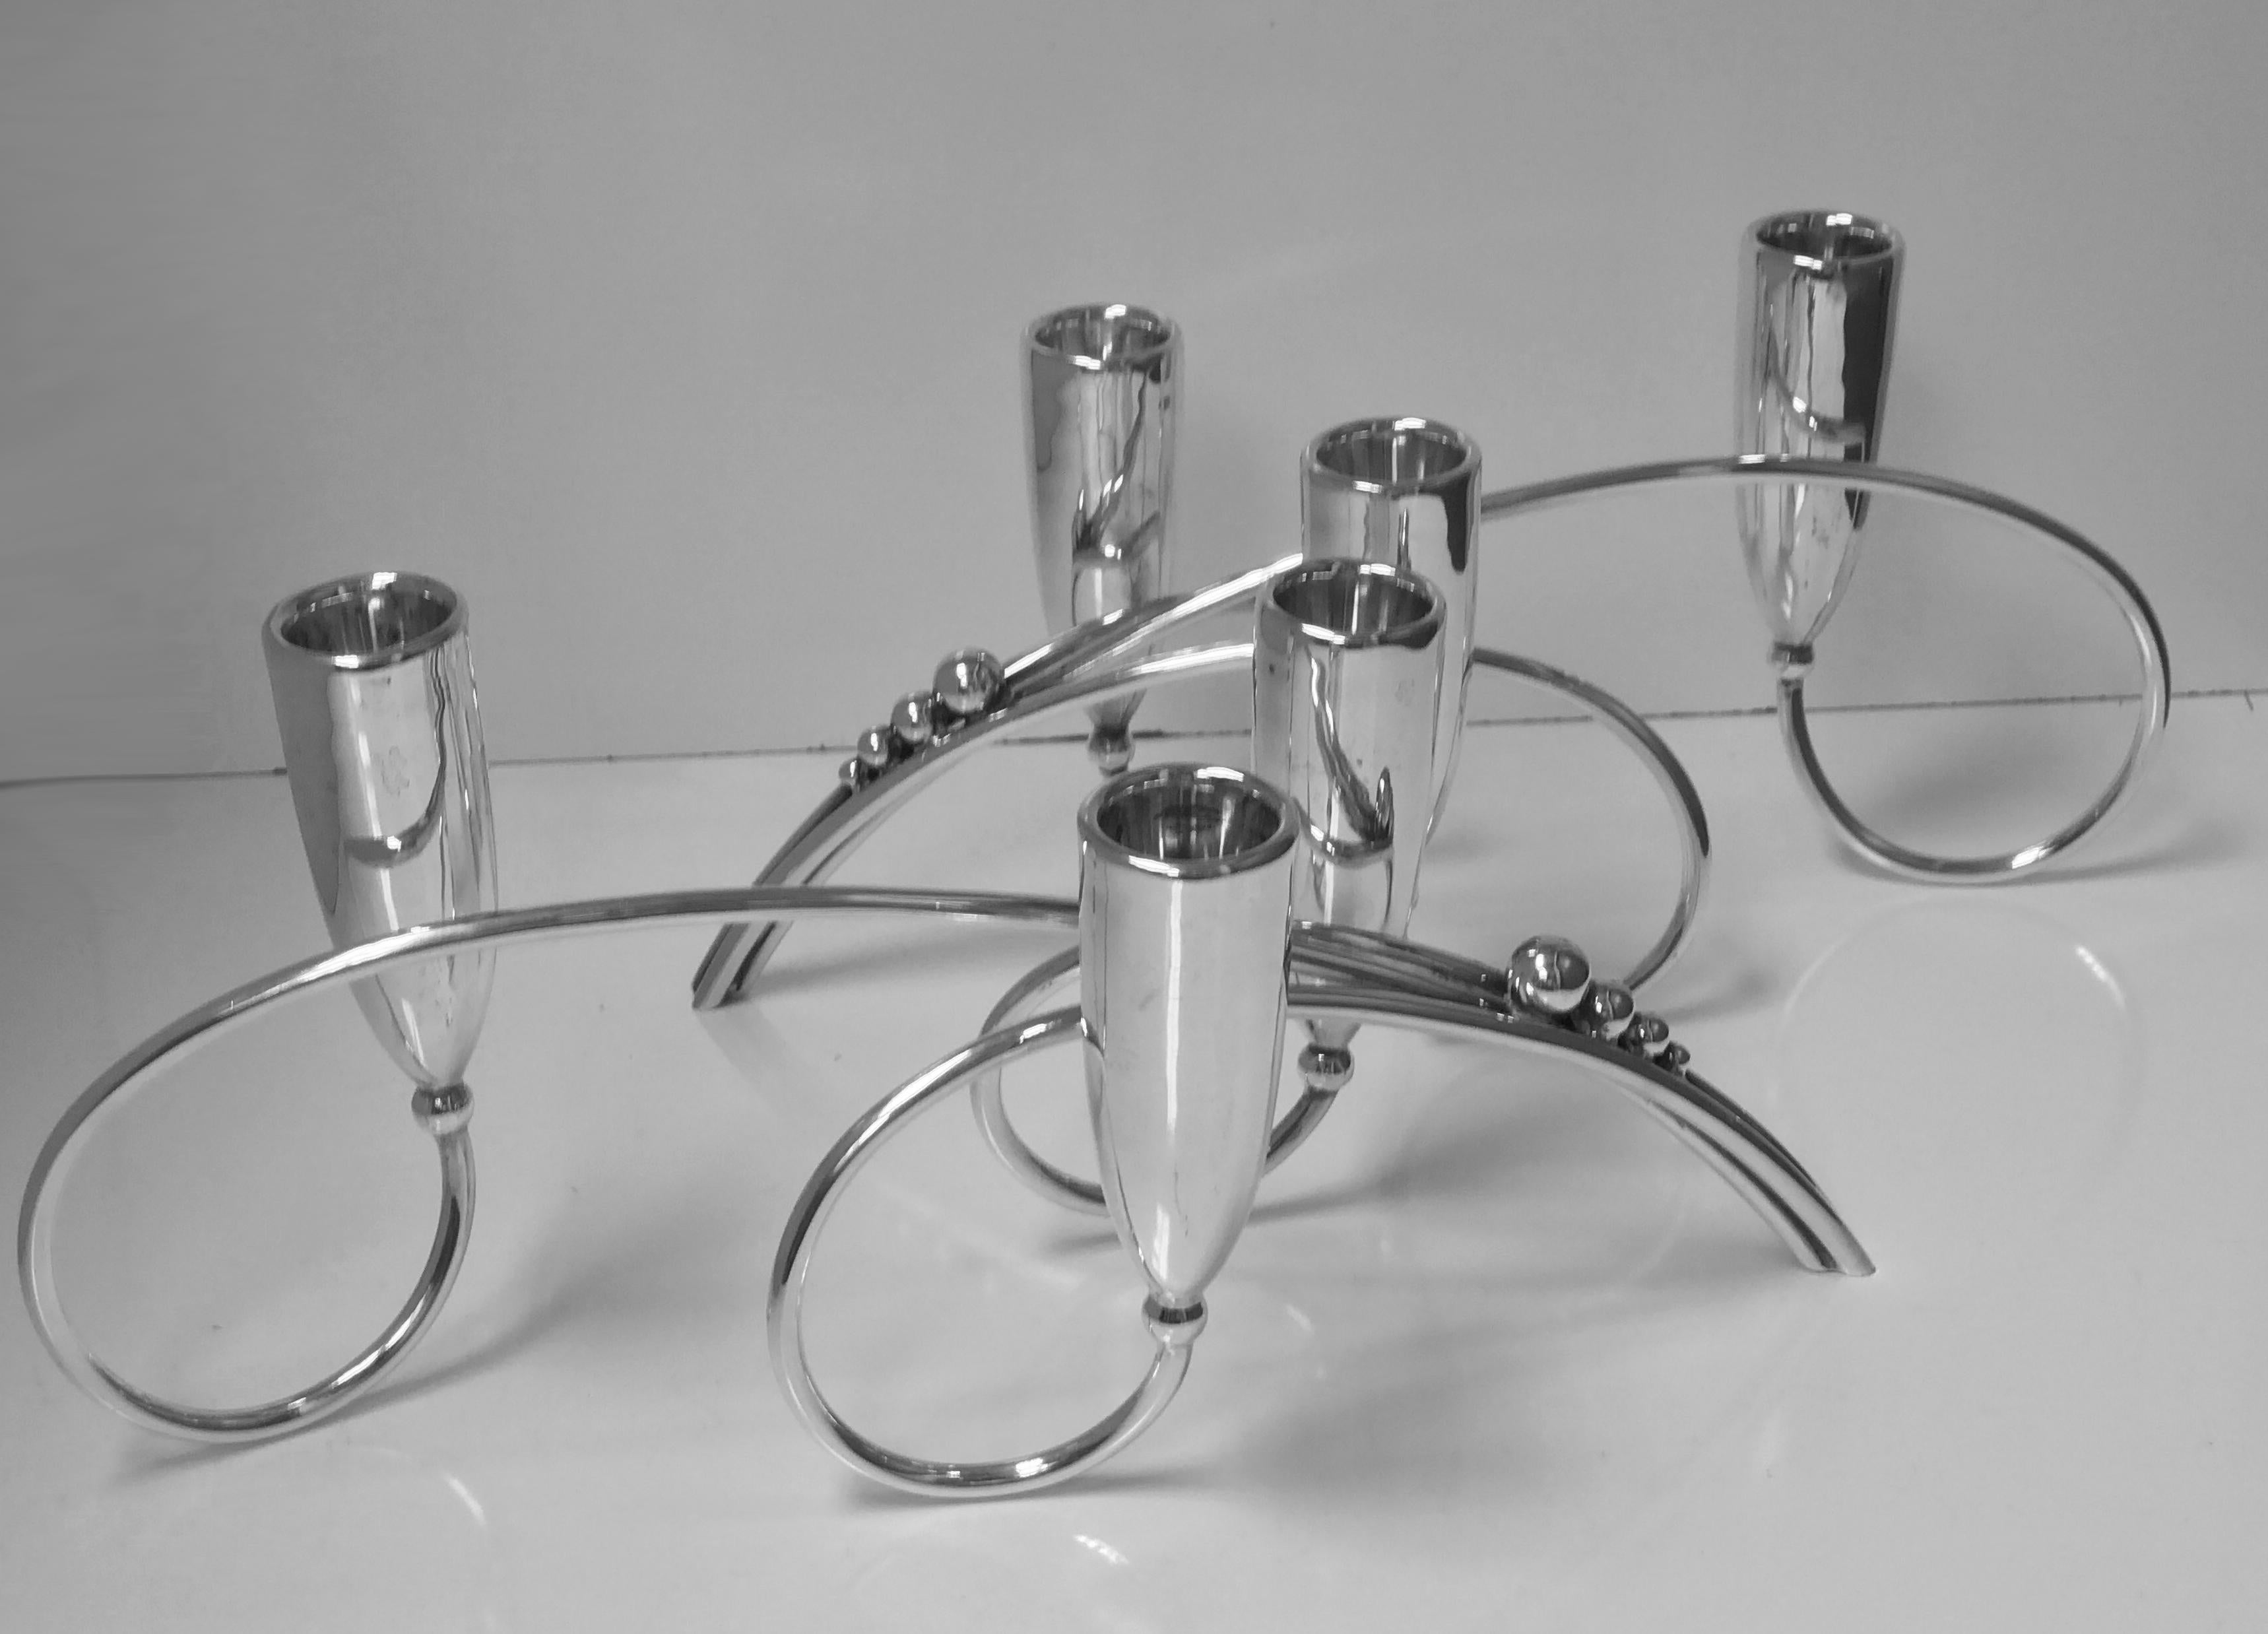 Pair of Mid-Century Modernist Aceves sterling candelabra candlesticks, Mexico, circa 1950. Each of a stylized curvilinear and blossom Scandinavian Jensen style, with three vase tulip shape candle holders in each candelabrum. Marked for Tango Aceves